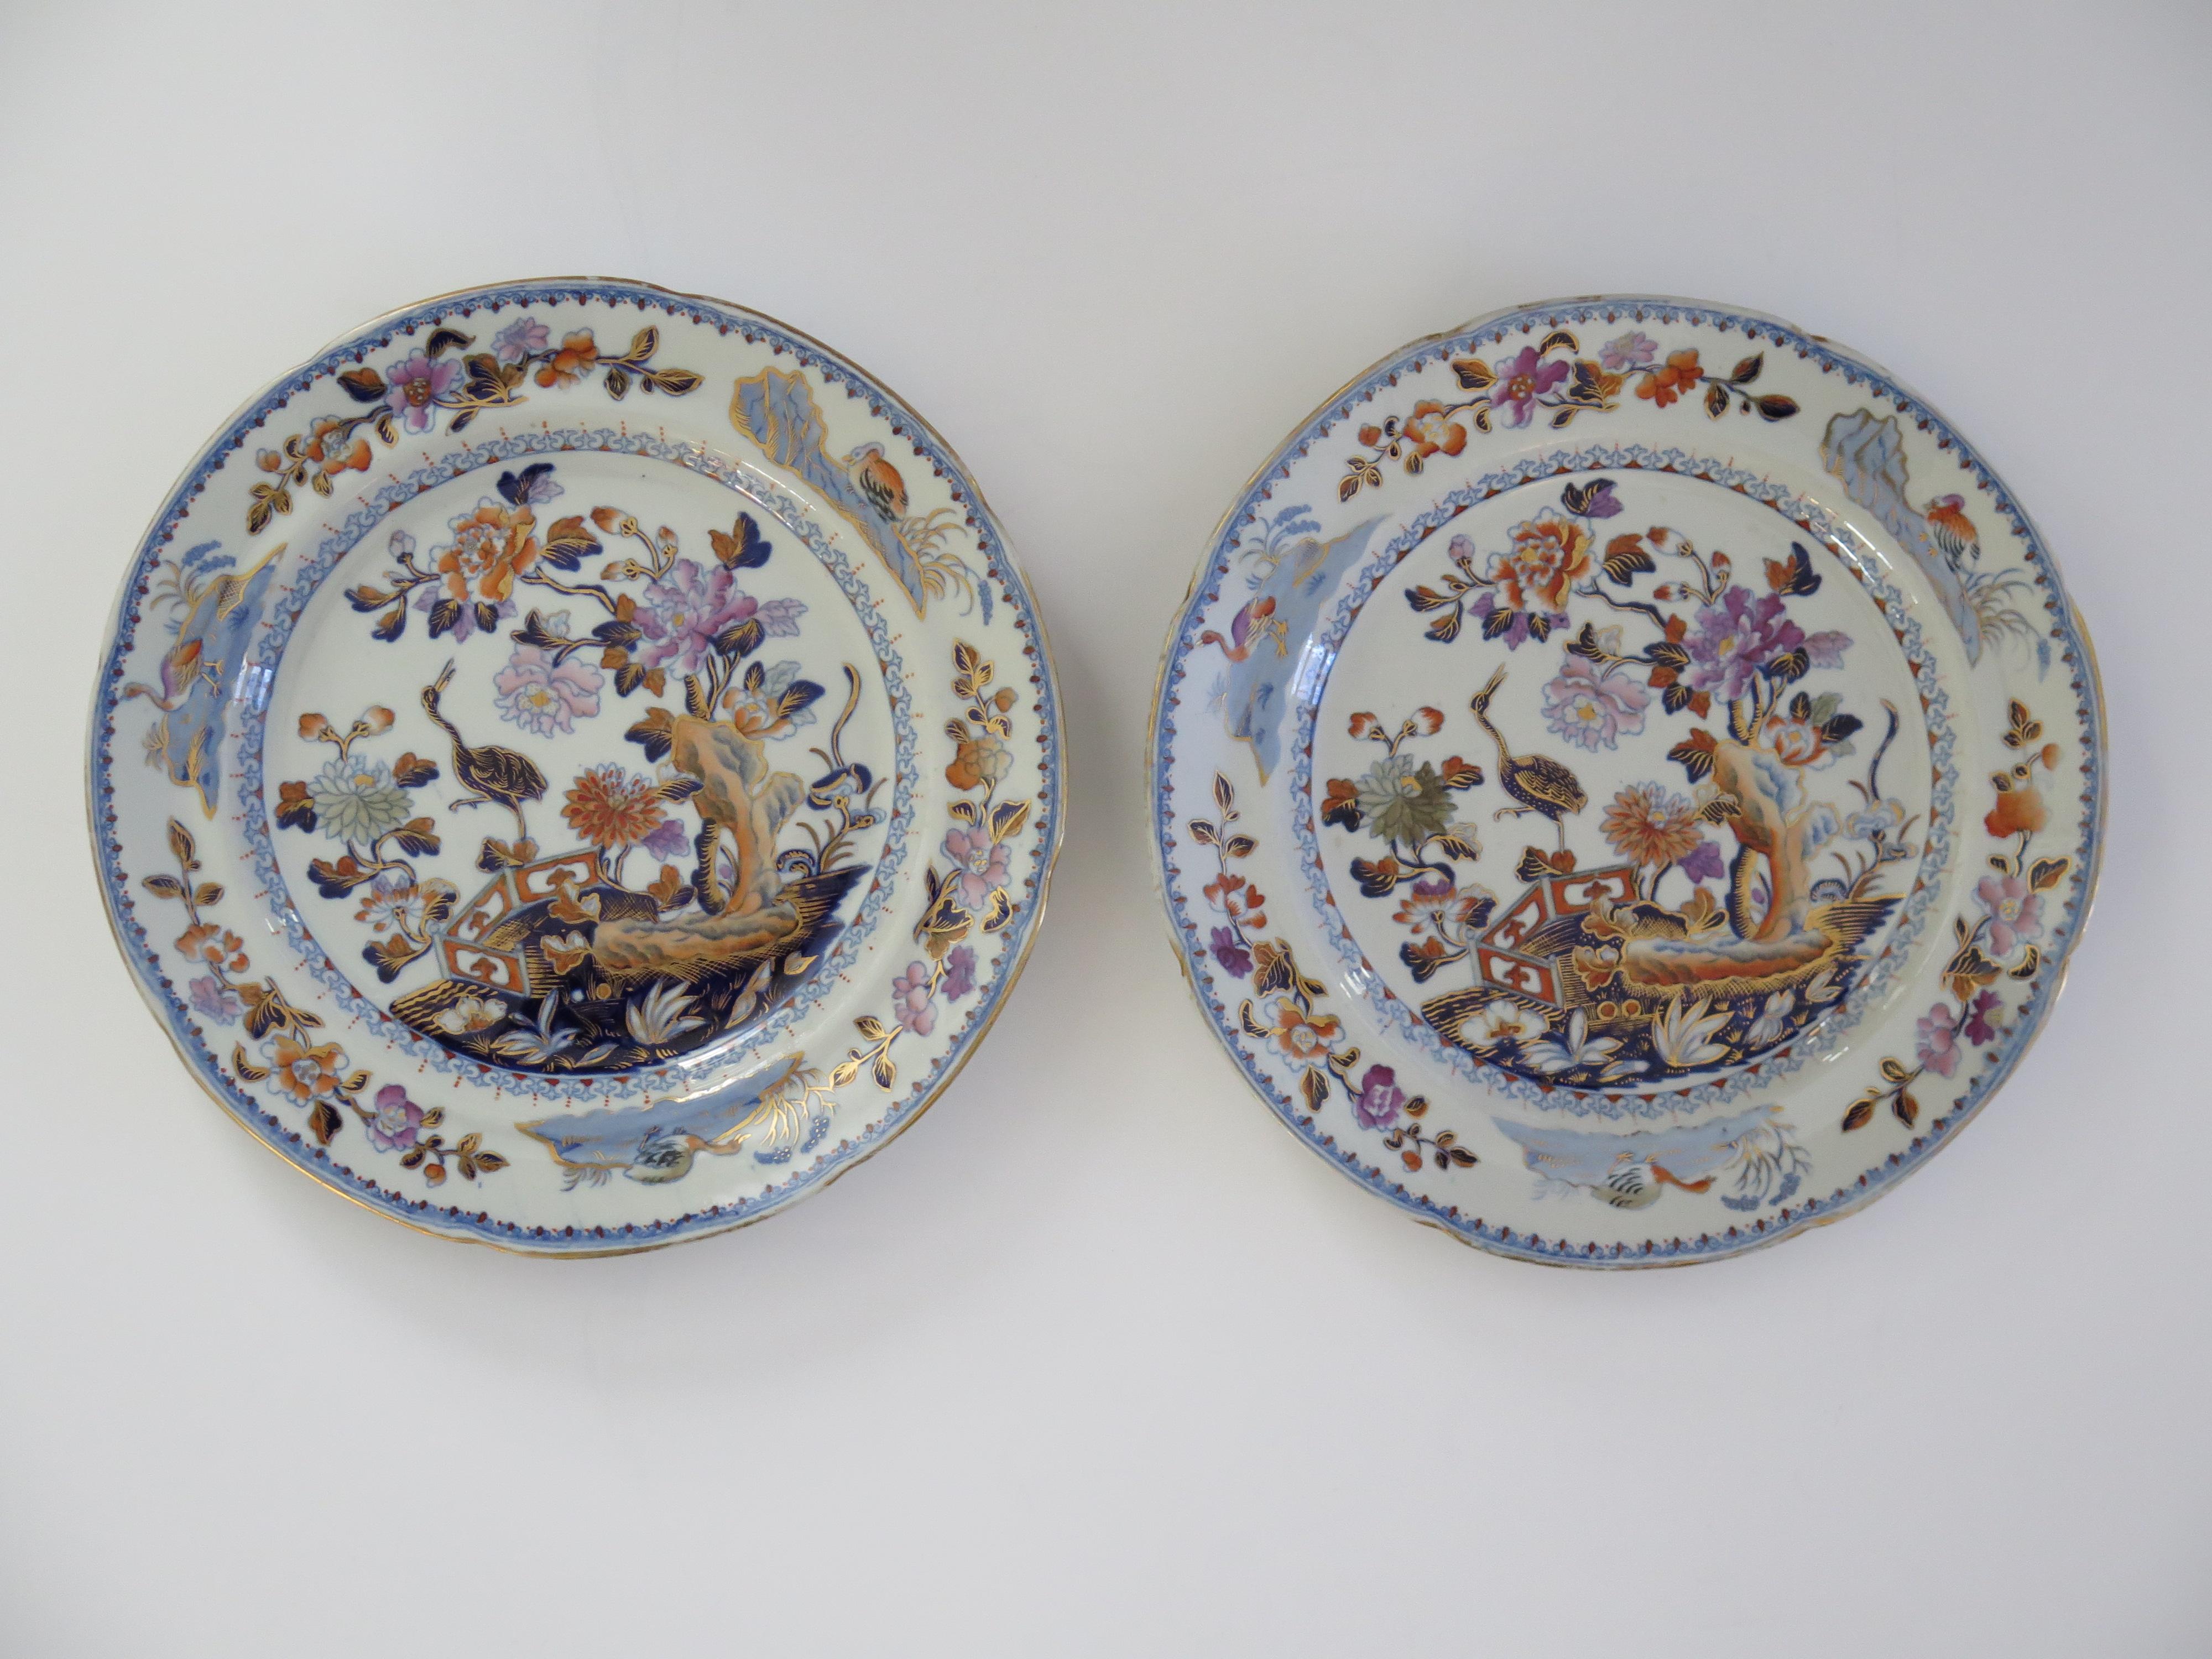 This is a finely hand painted PAIR of early Stone China (Ironstone) Side or Desert Plates, which date to the George 111 period, circa 1815. Made by the DAVENPORT factory of Longport, Staffordshire Potteries, England.

The plates are very well potted